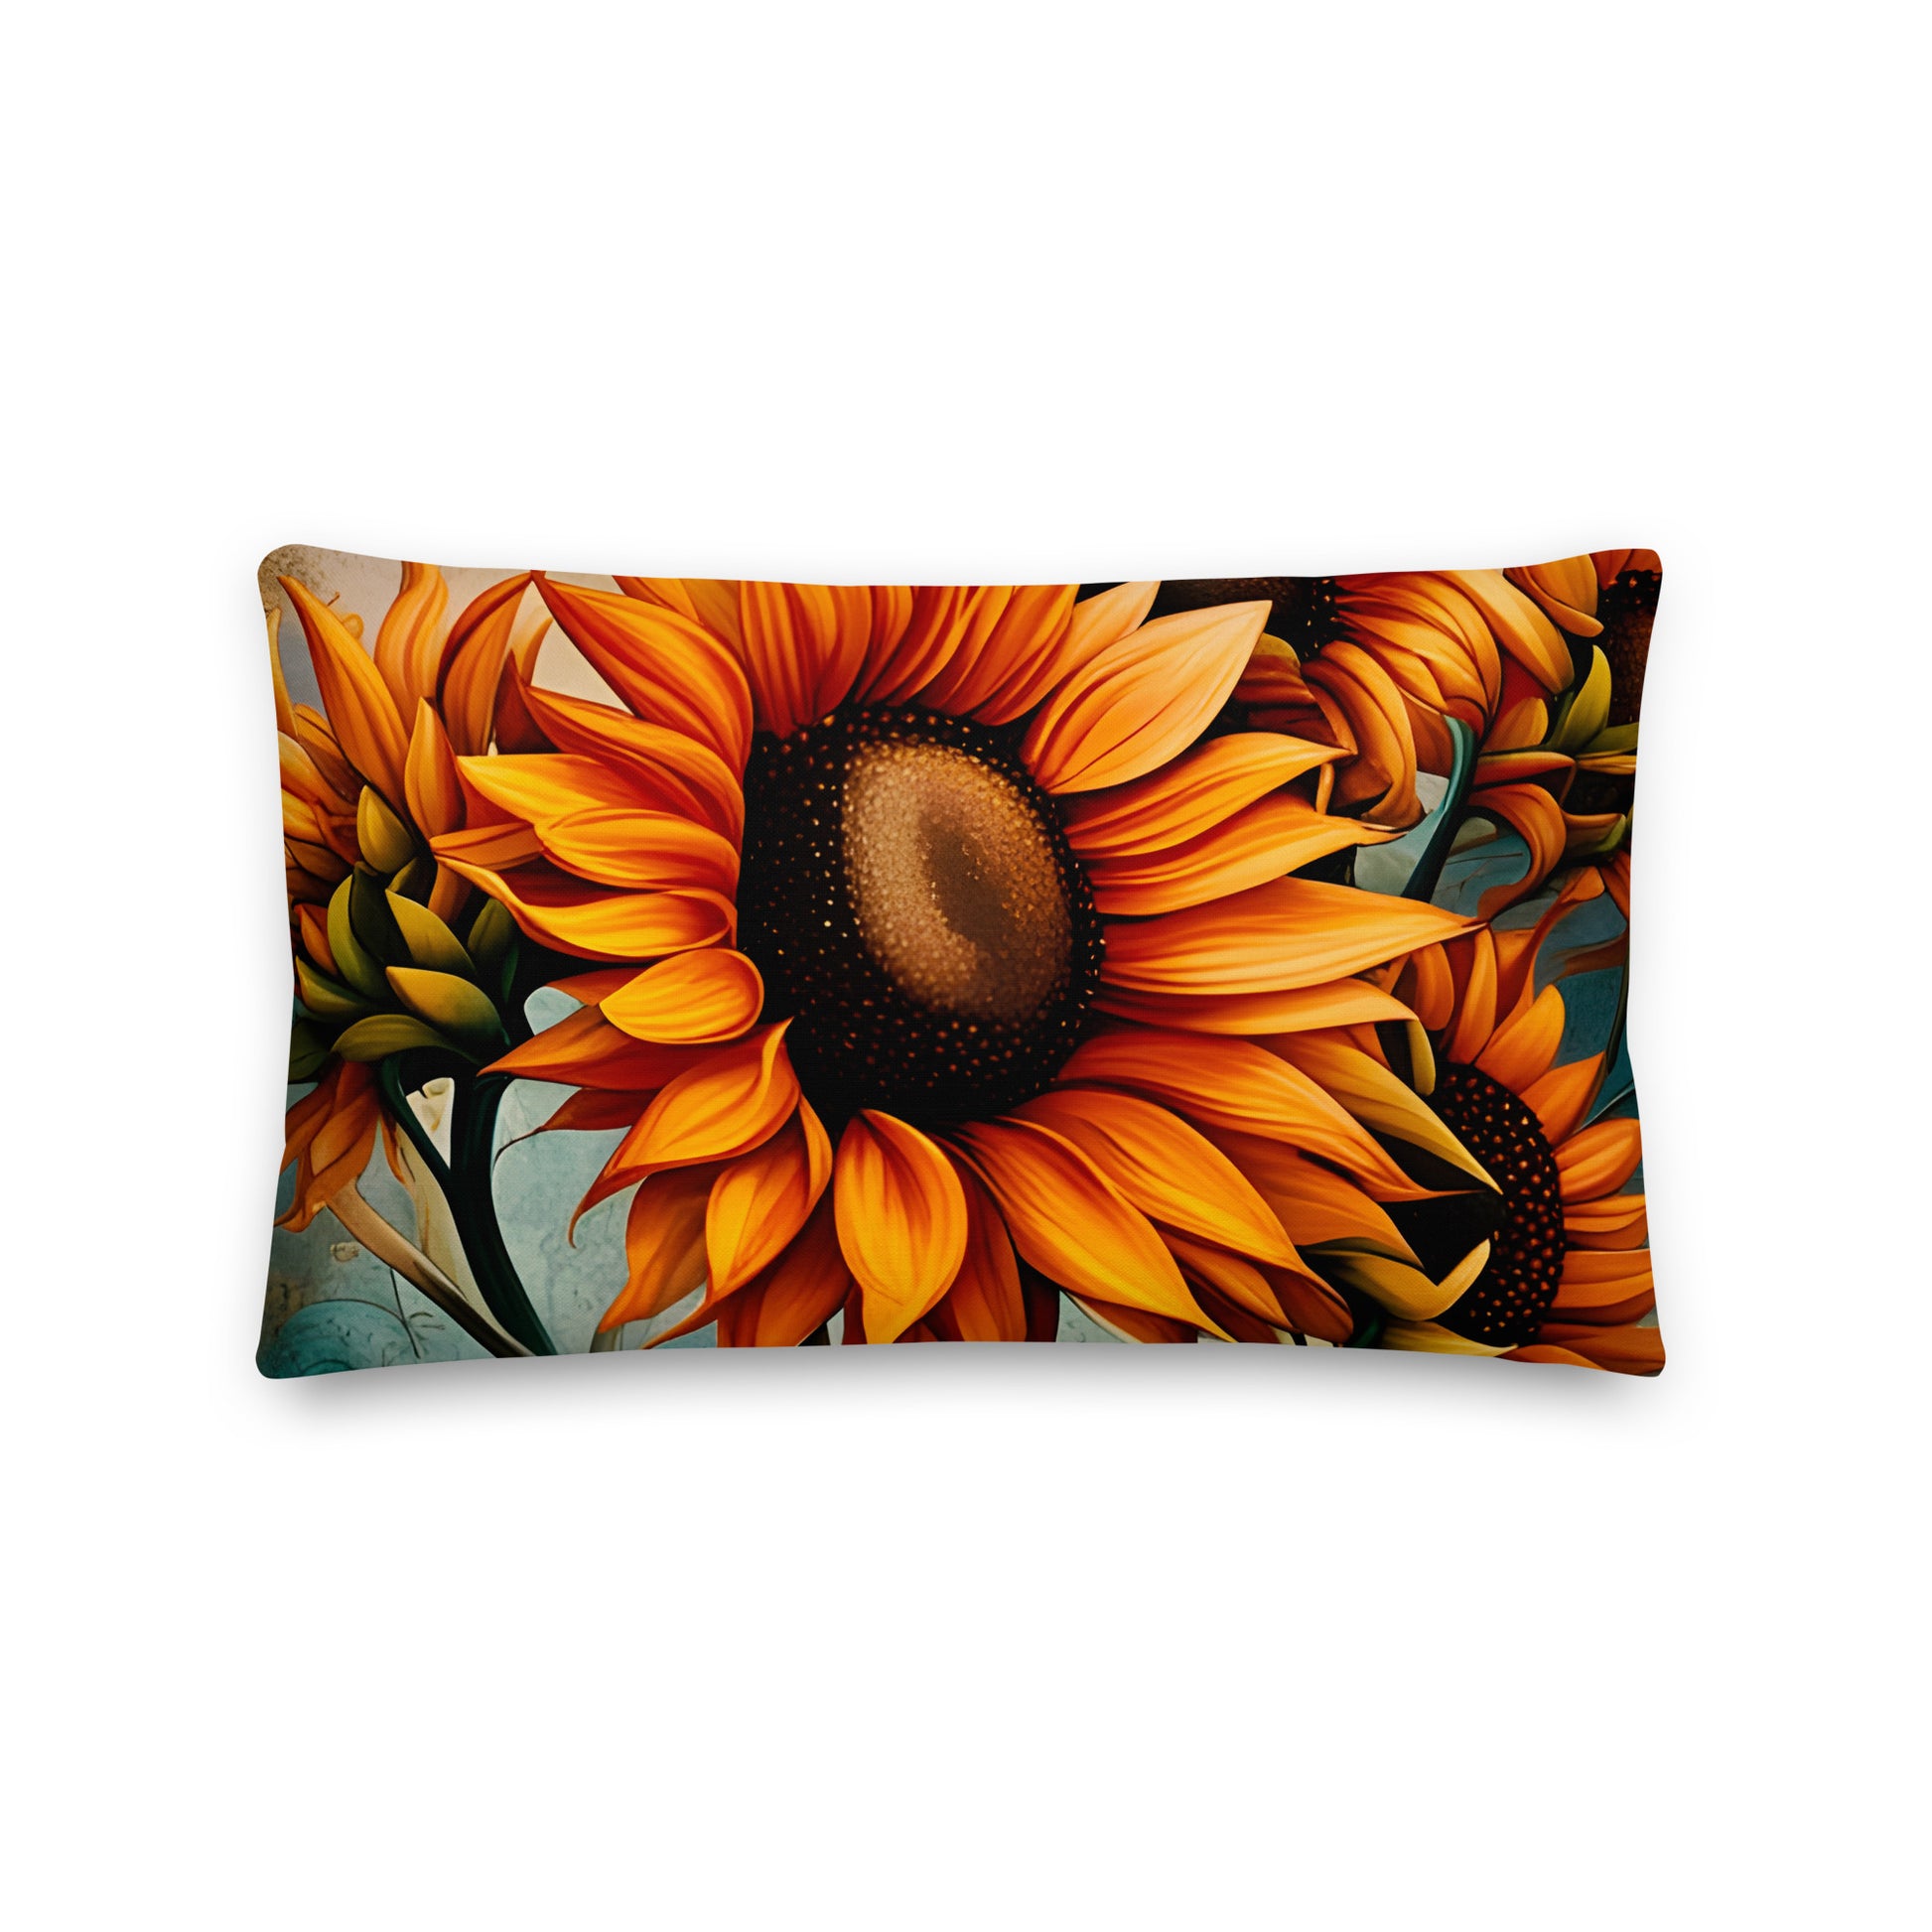 Floral Themed Premium Lumbar Pillow 20x12 - Sunflowers Crop on Distressed Blue and Copper Background Print